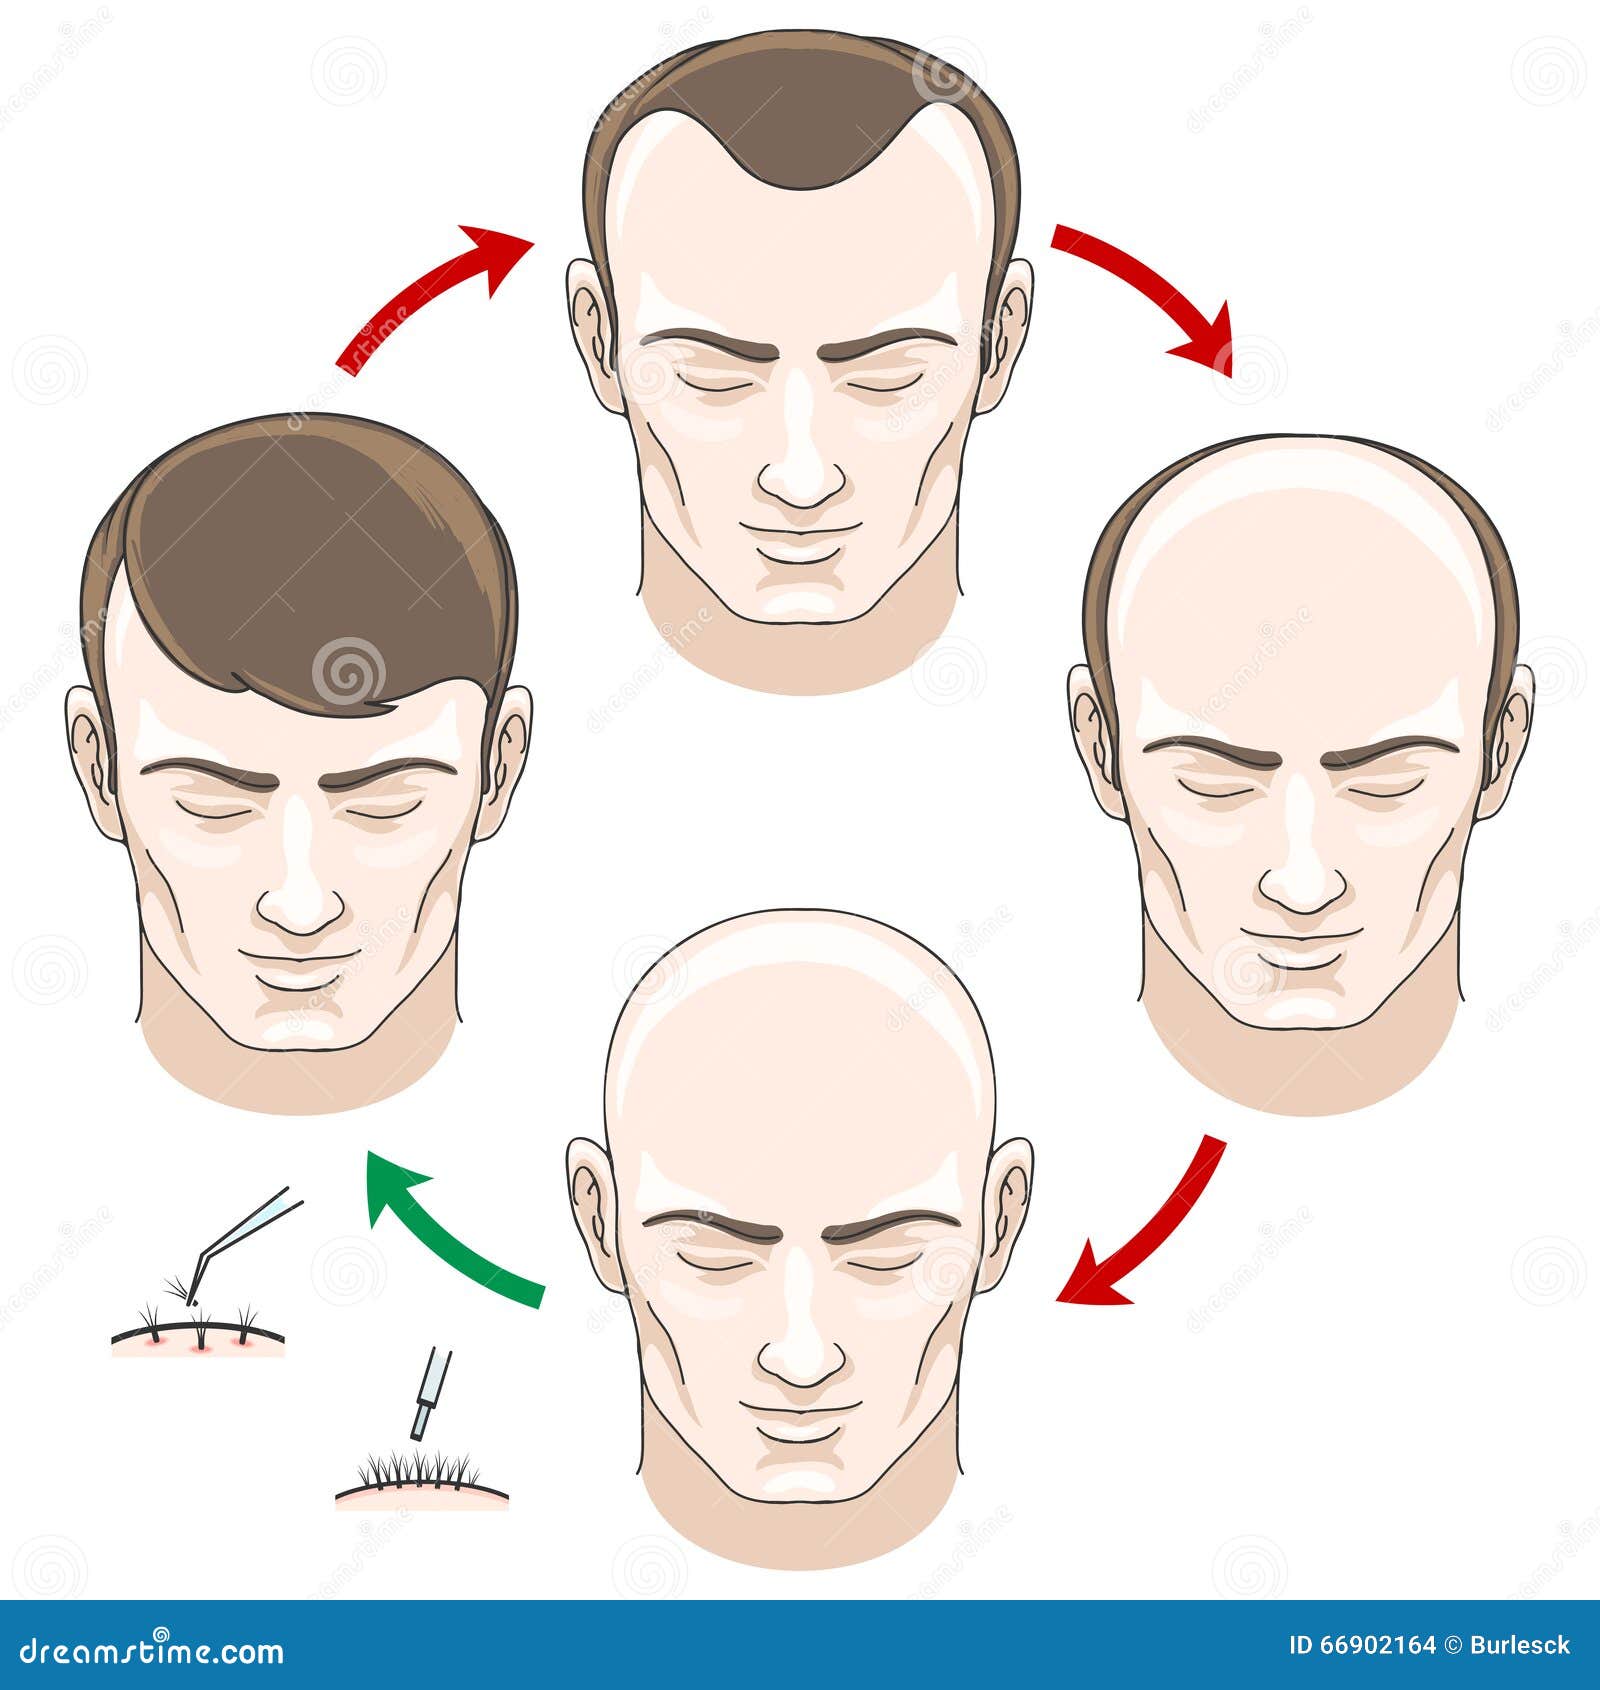 stages of hair loss, treatment and transplantation